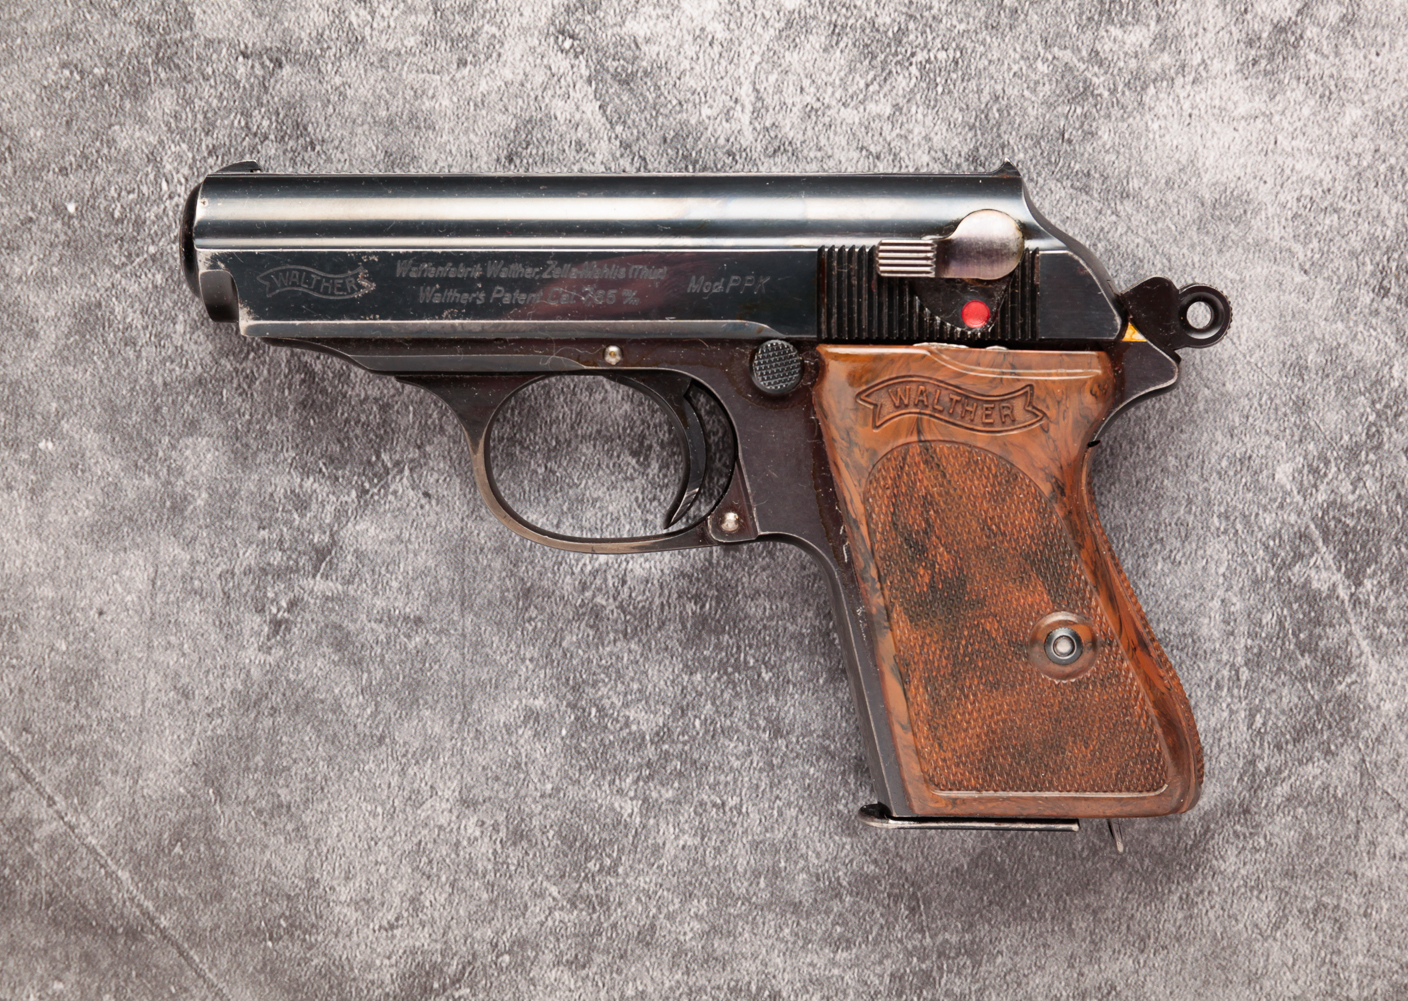 WALTHER PPK 7.65MM SEMI AUTOMATIC PISTOL